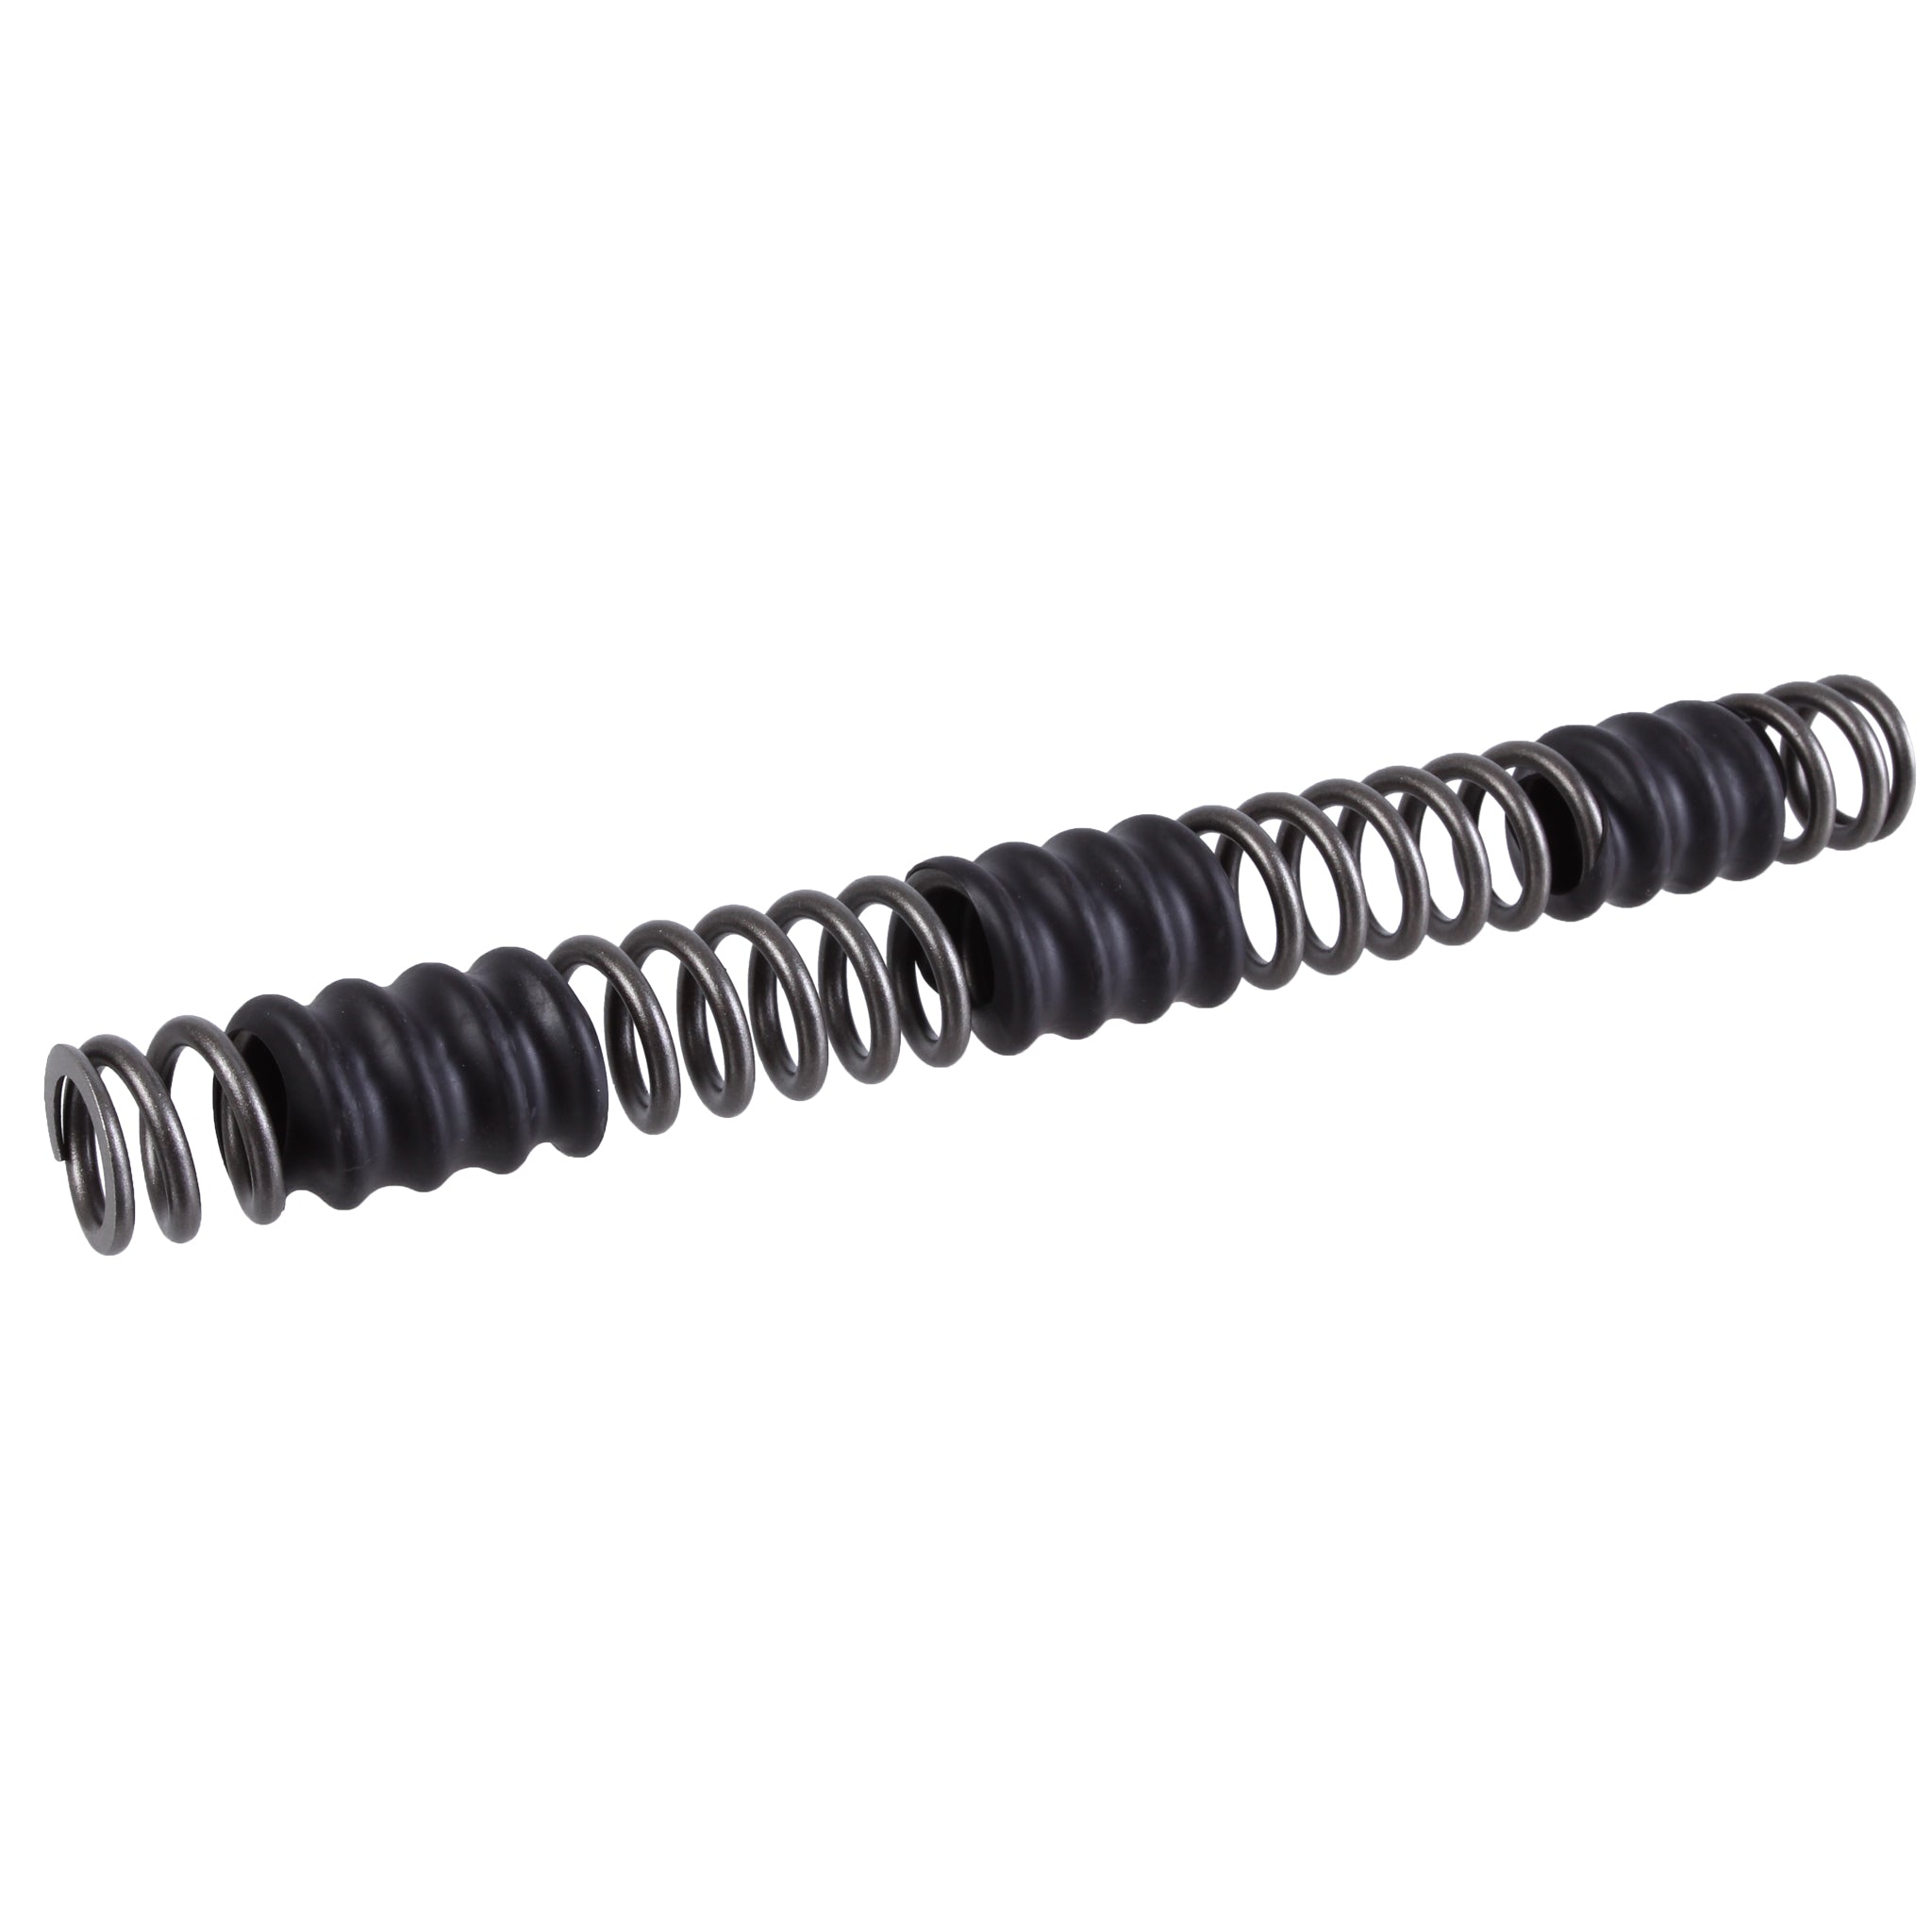 Cane Creek Coil Spring Helm - 45 lbs/In Black